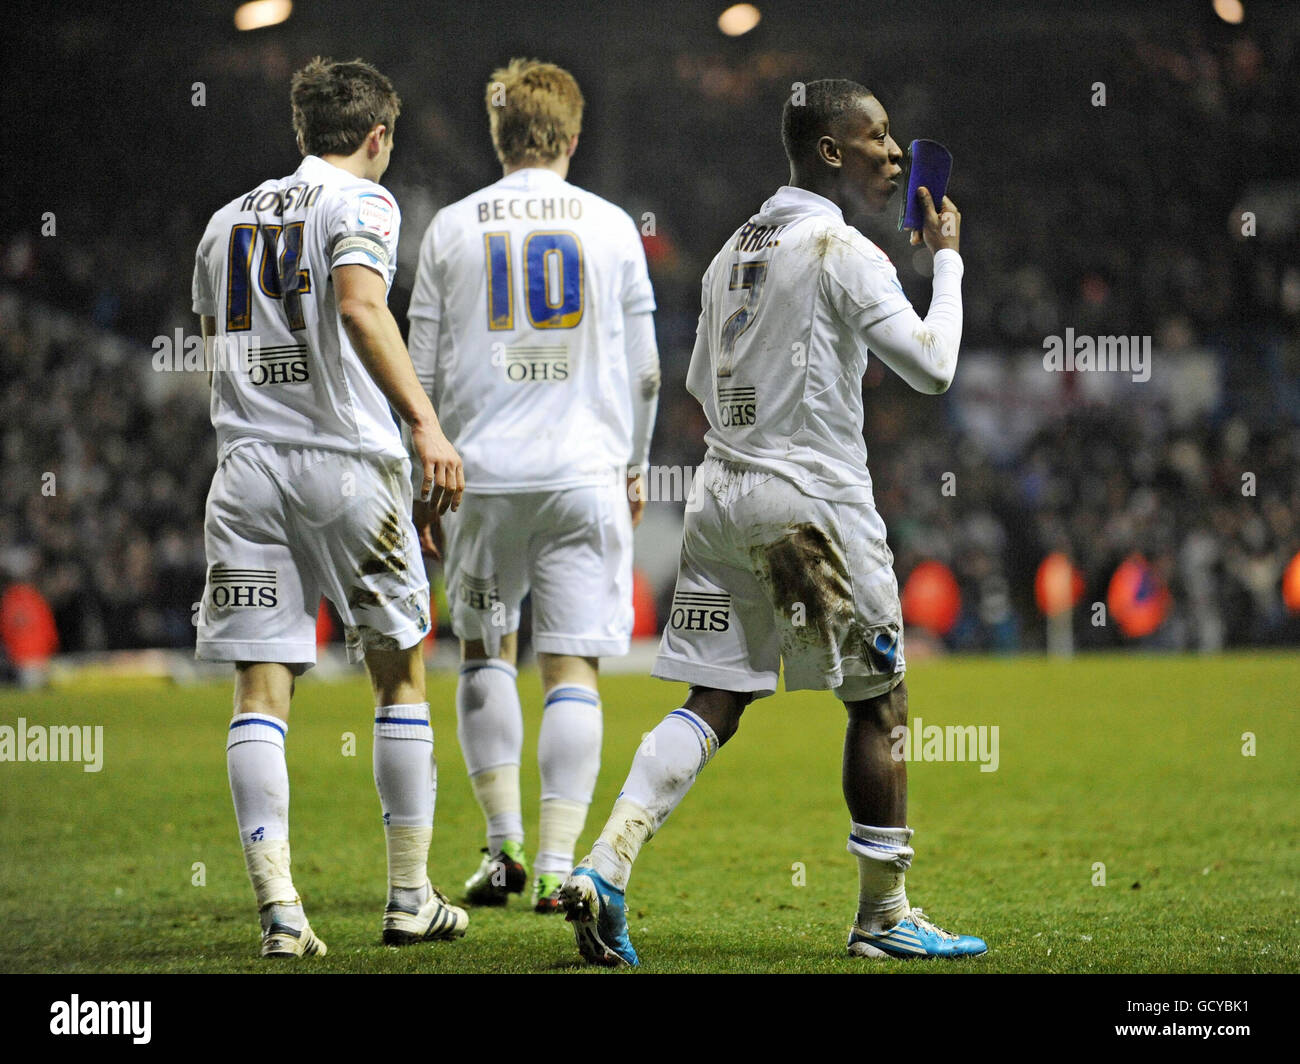 Leeds United's Max Gradel kisses his shinpad after scoring his side's second goal during the npower League Championship match at Elland Road, Leeds. Stock Photo